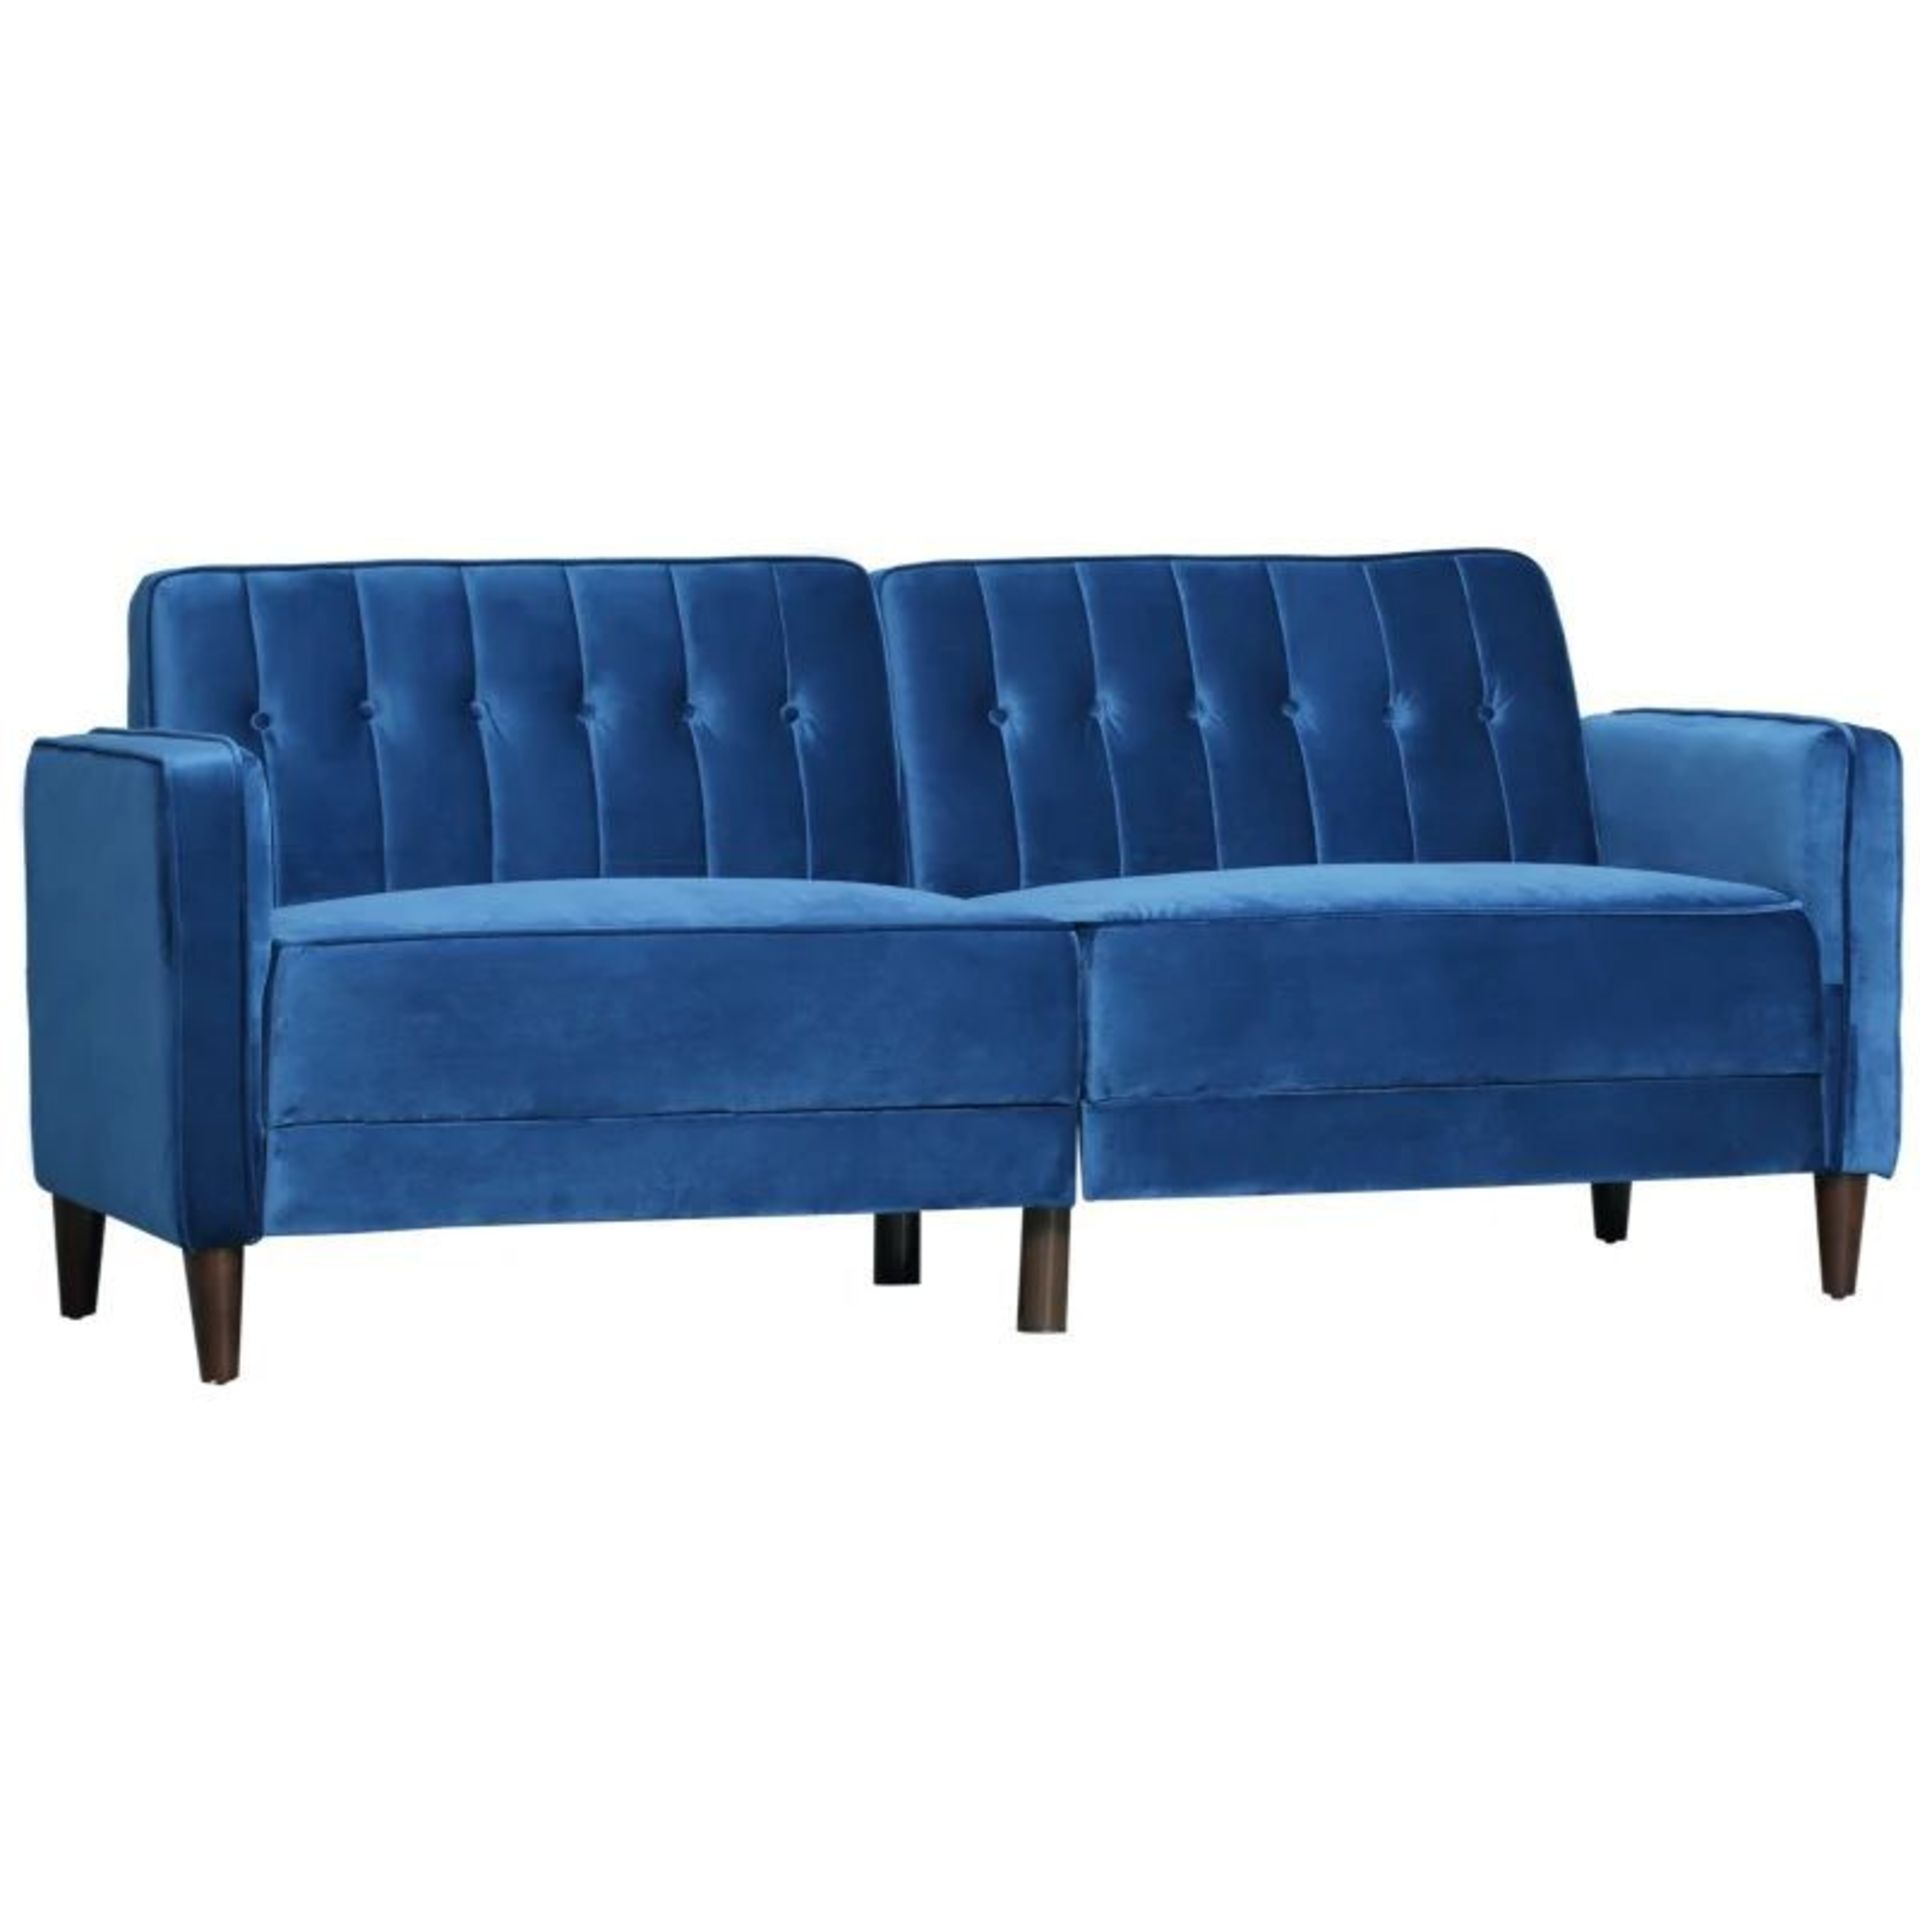 HOMCOM Modern Convertible Sofa Futon Velvet-Touch Tufted Couch Compact Loveseat with Adjustable - Image 3 of 4